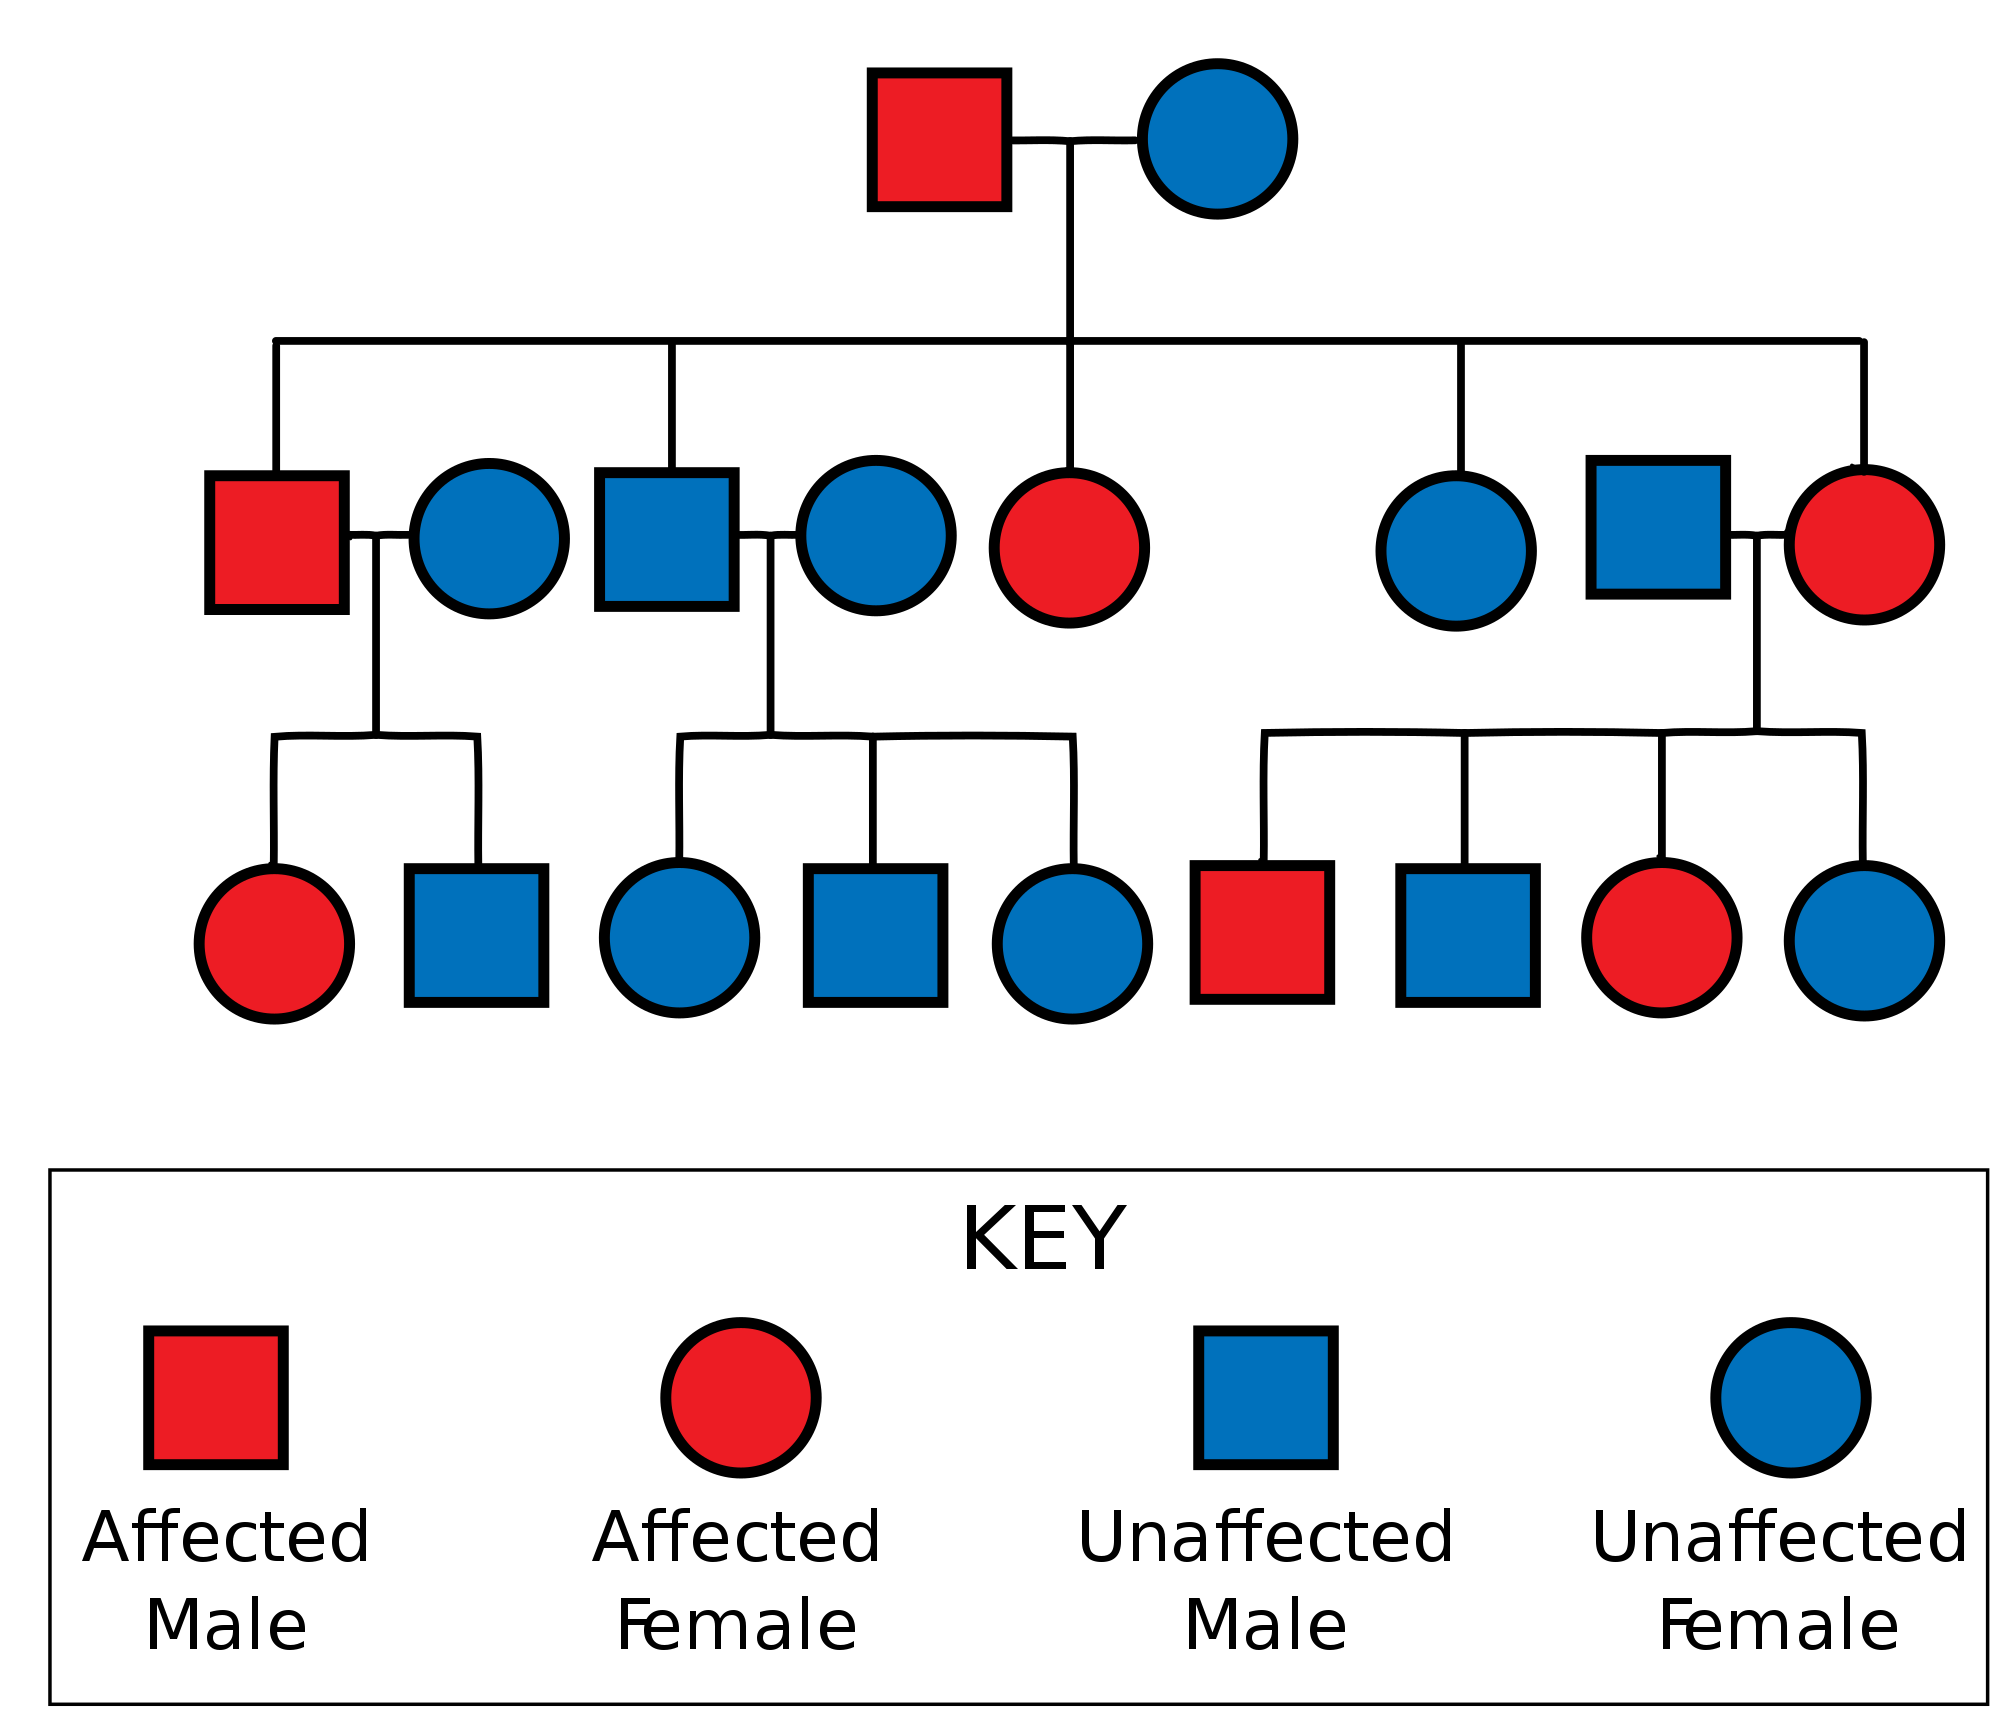 Shows an example of a pedigree.